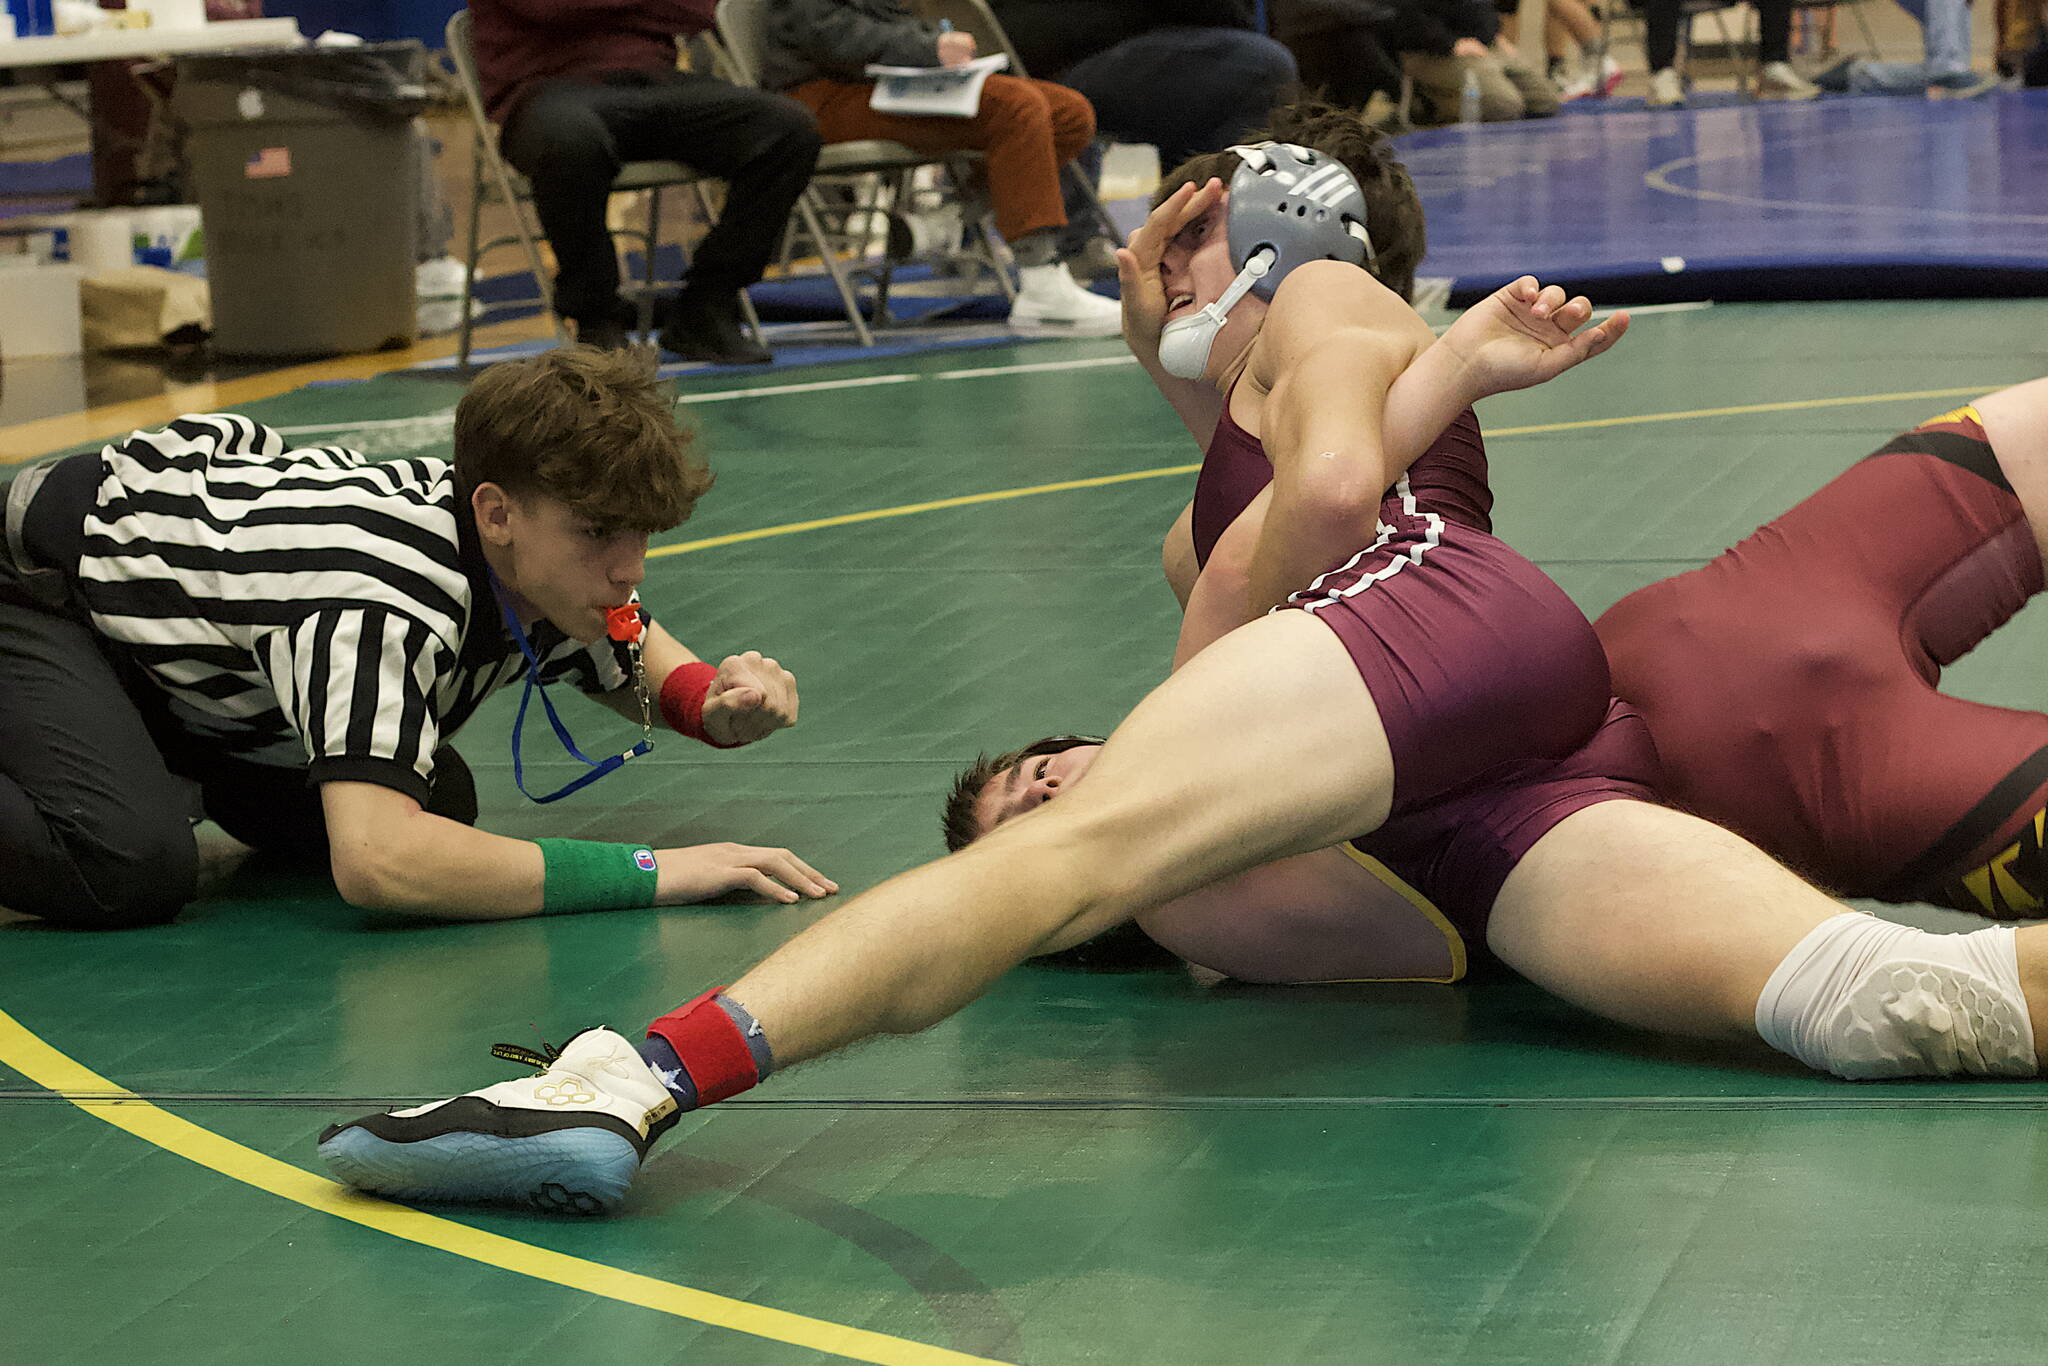 Ketchikan High School’s Hunter Cowan tries to pin Hoonah City School’s Lawrence Howland during the matchup in the 140-pound division of the Southeast Showdown at Thunder Mountain High School on Saturday (Mark Sabbatini / Juneau Empire)